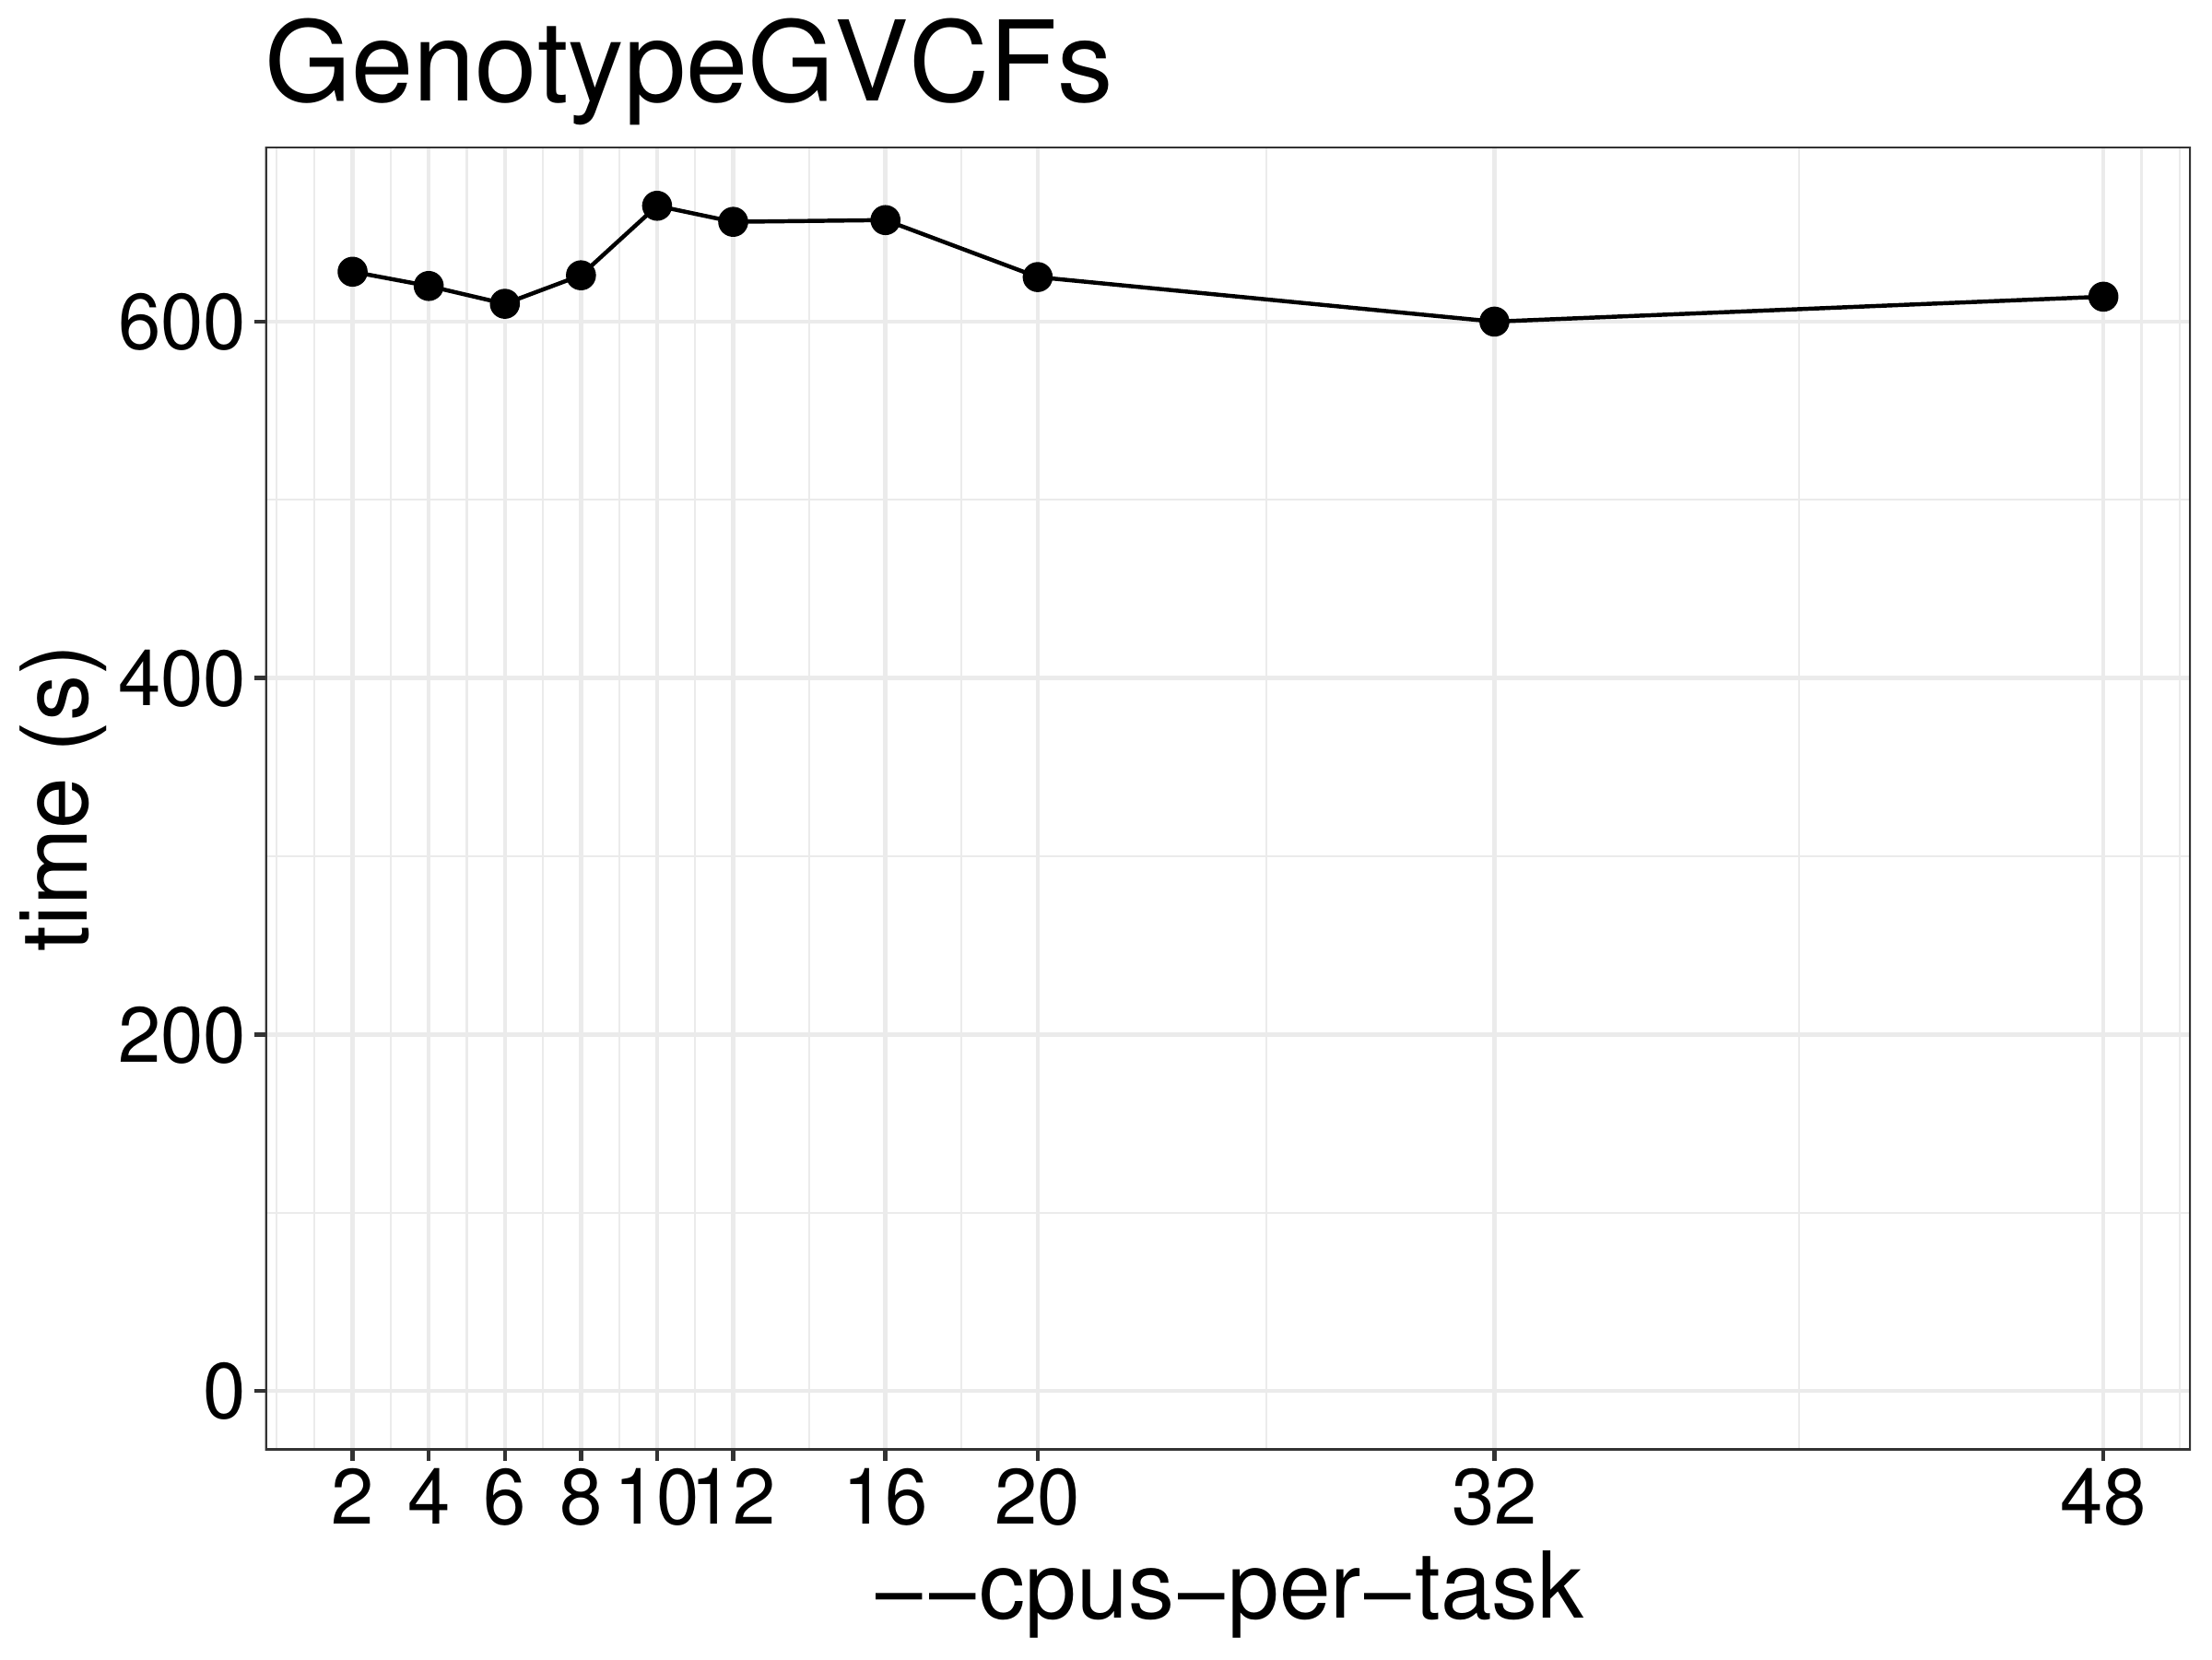 Runtime of GenotypeGVCFs as a function of the number of threads